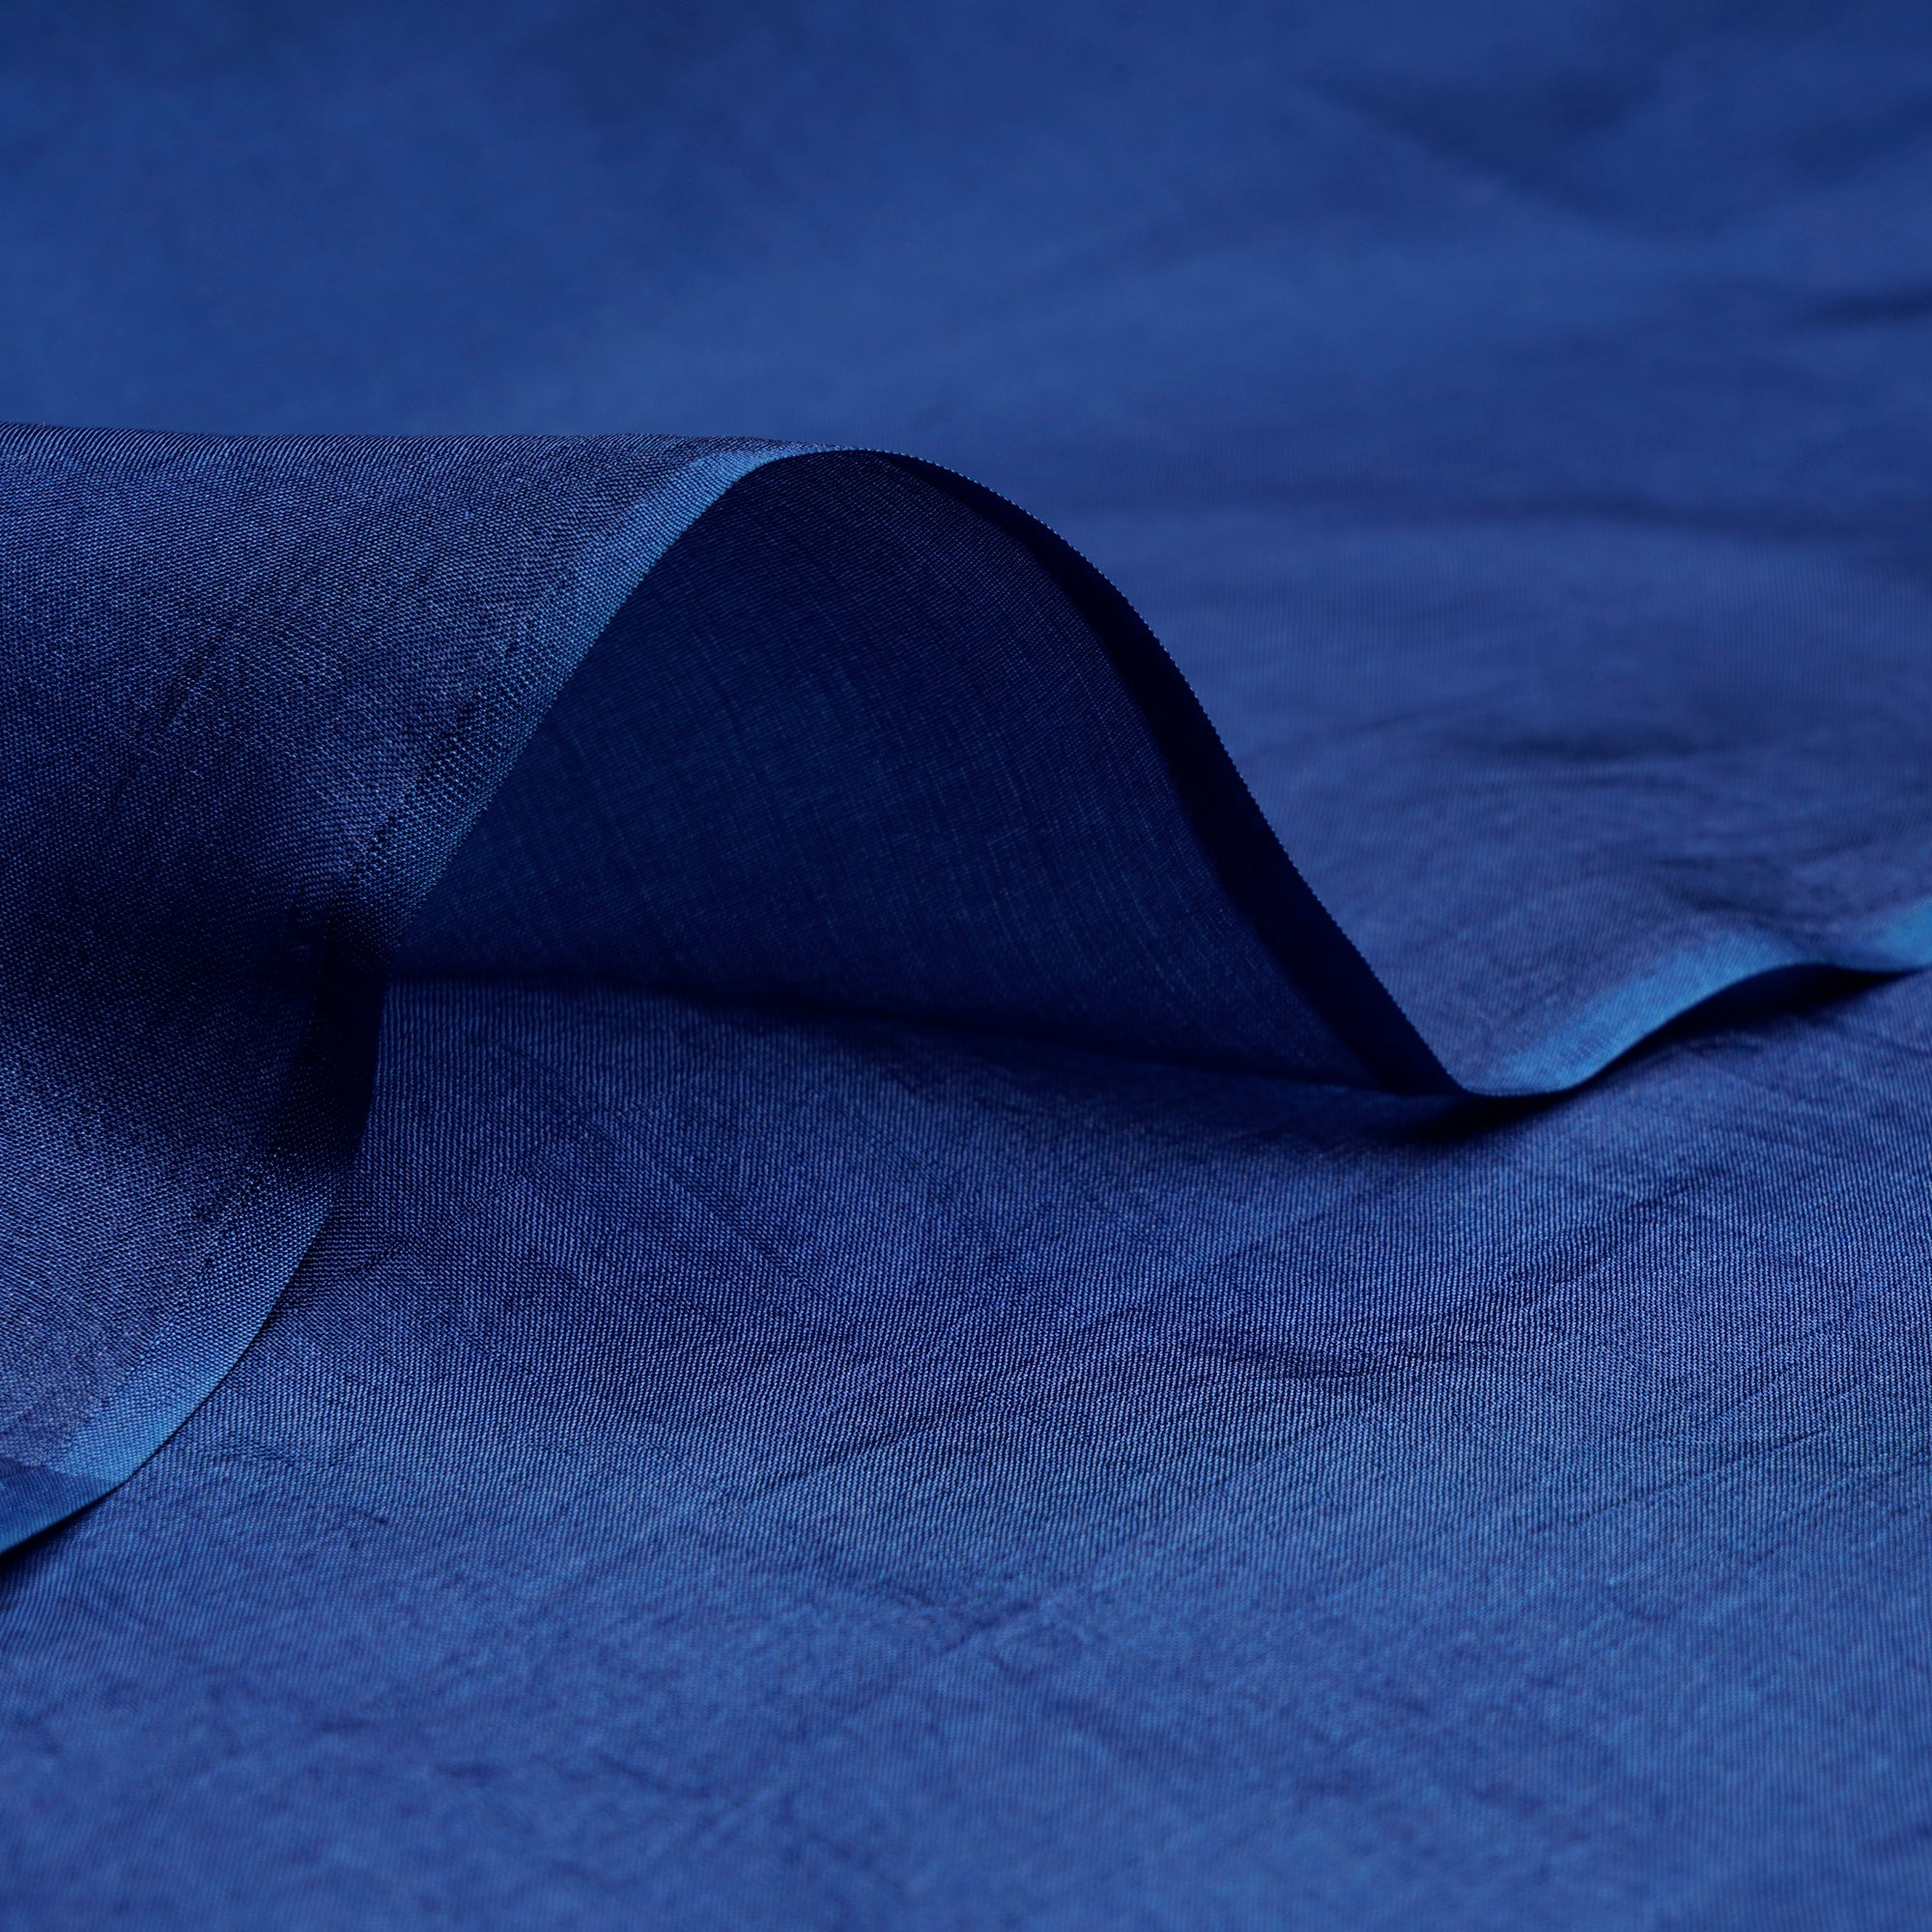 Blue Color Ombre Dyed Tabby Silk Fabric